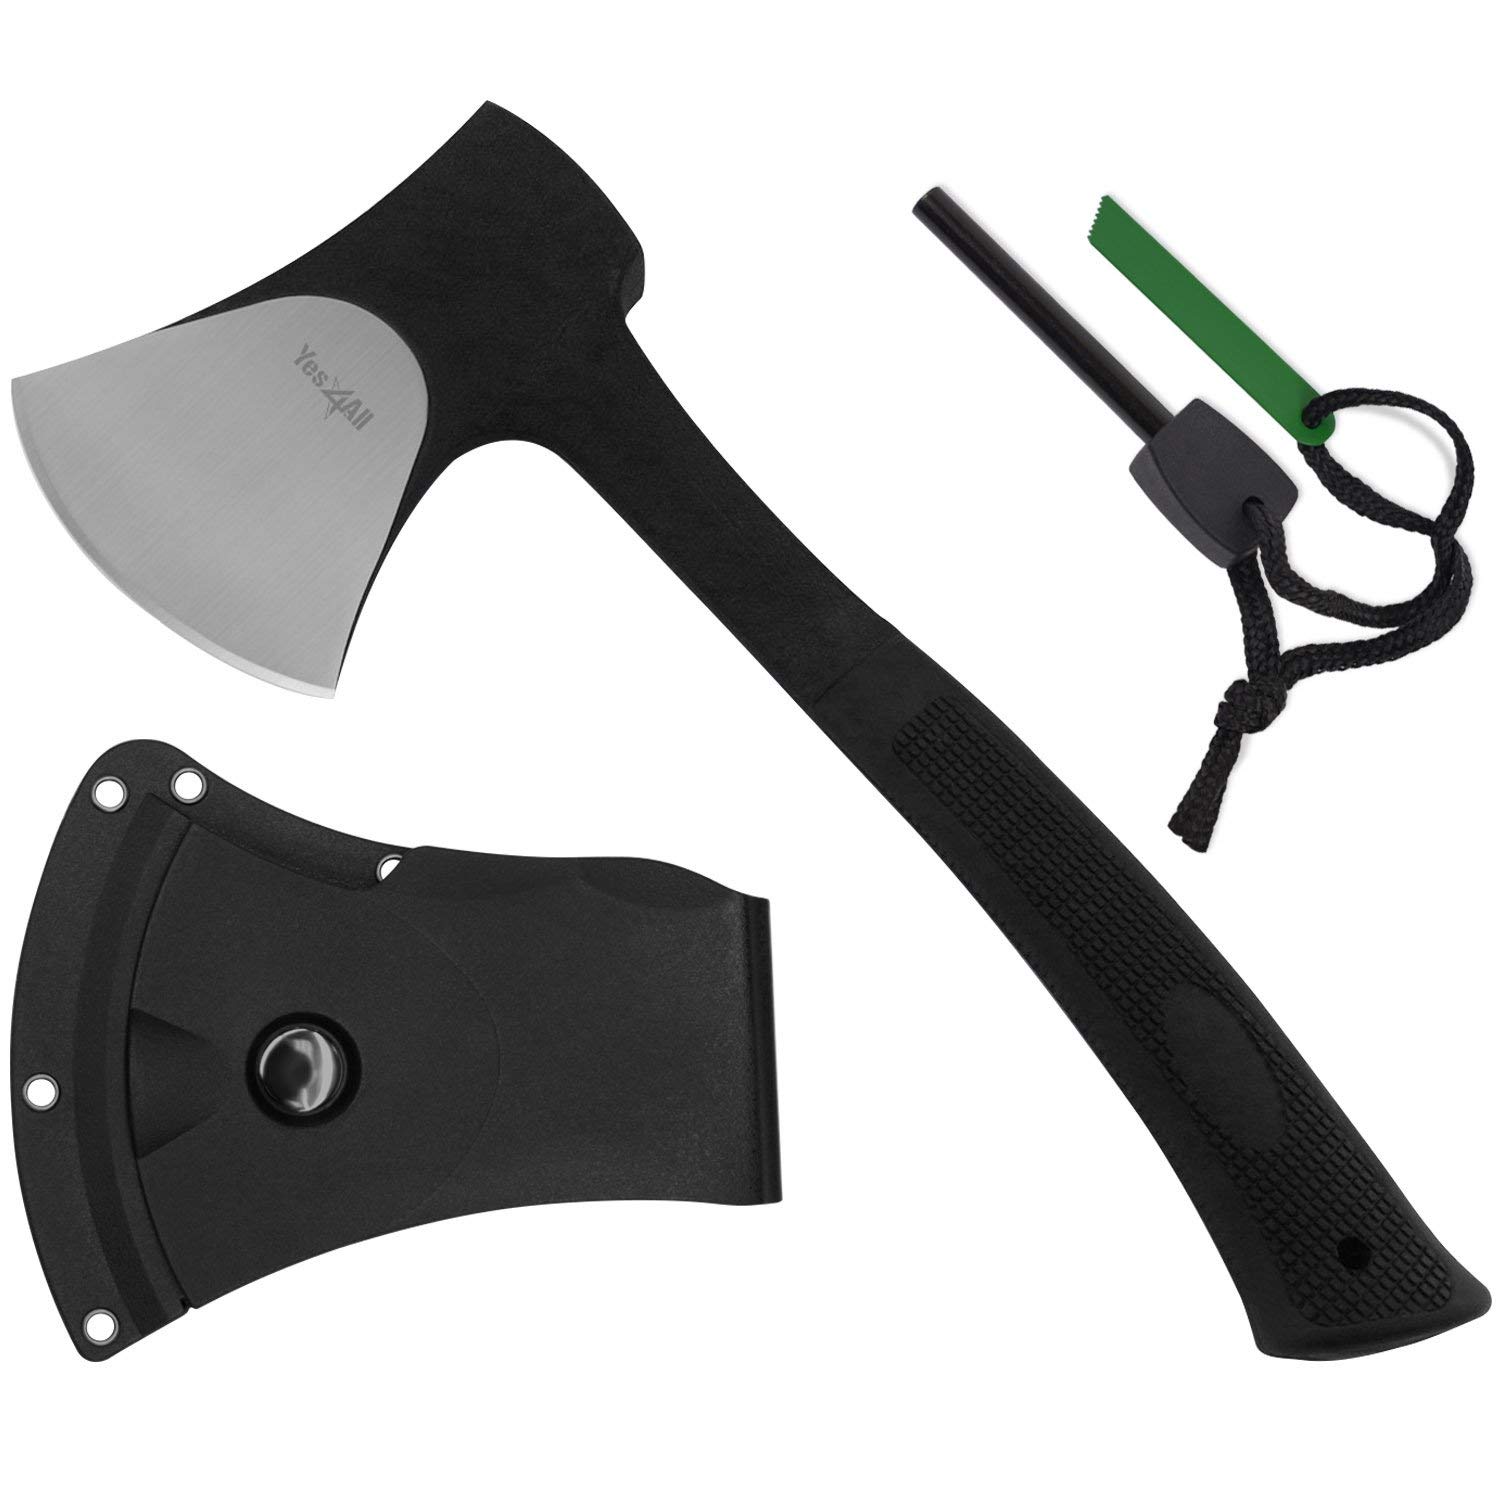 Amazon.com : Special Sales: Yes4All Outdoor Camping Hunting Survival ...